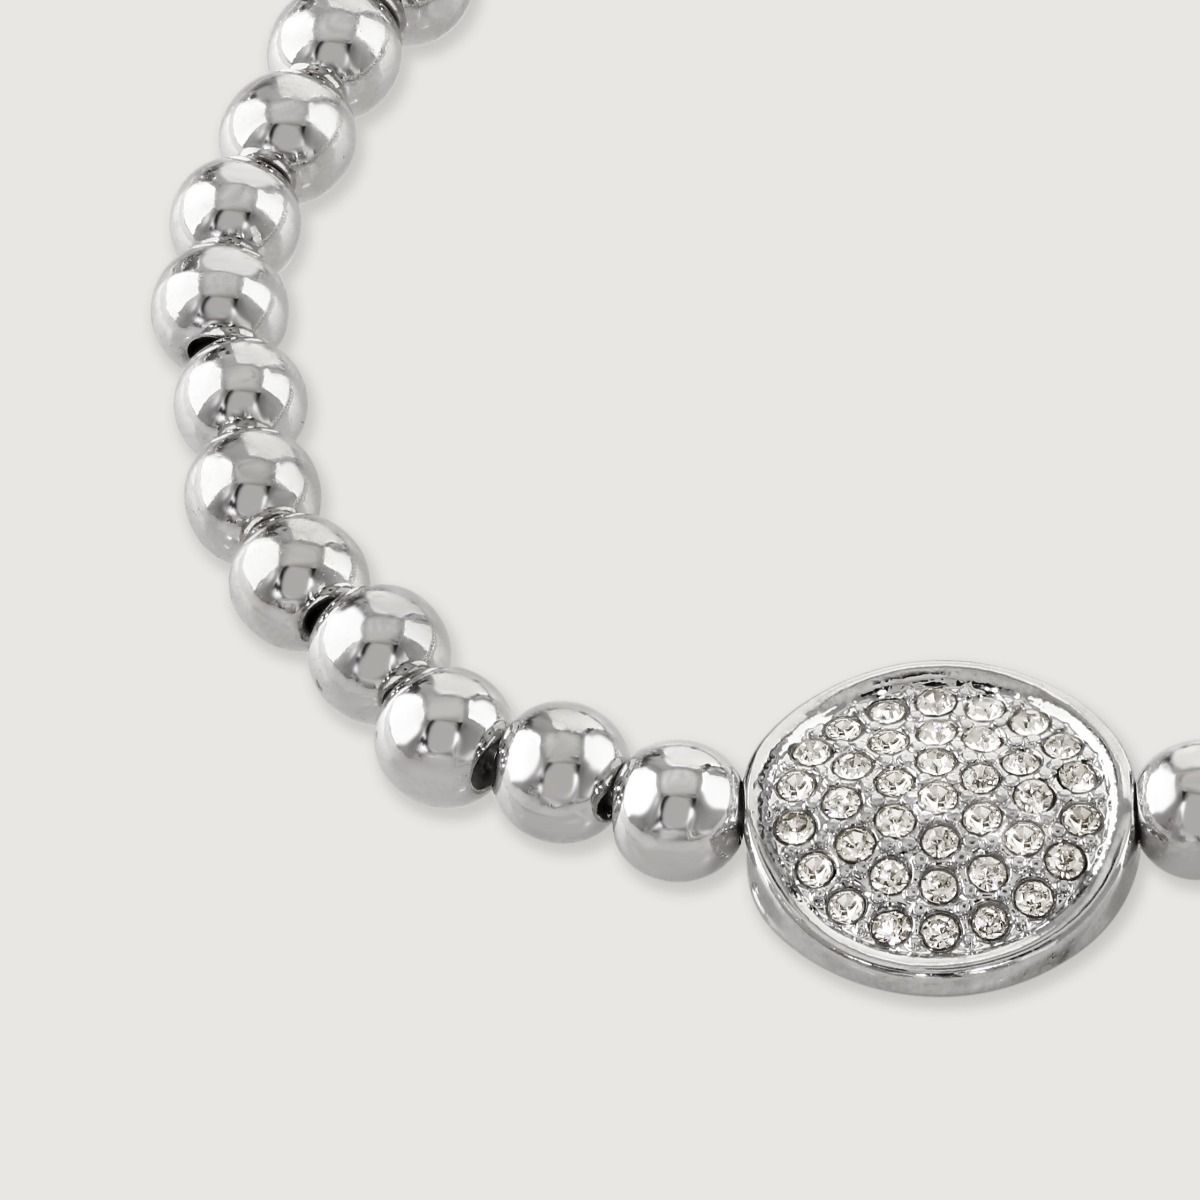 This stylish beaded friendship bracelet features a sparkling pave disc, adding a touch of elegance to its vibrant design. Handcrafted with care, it embodies the spirit of unity and connection. 